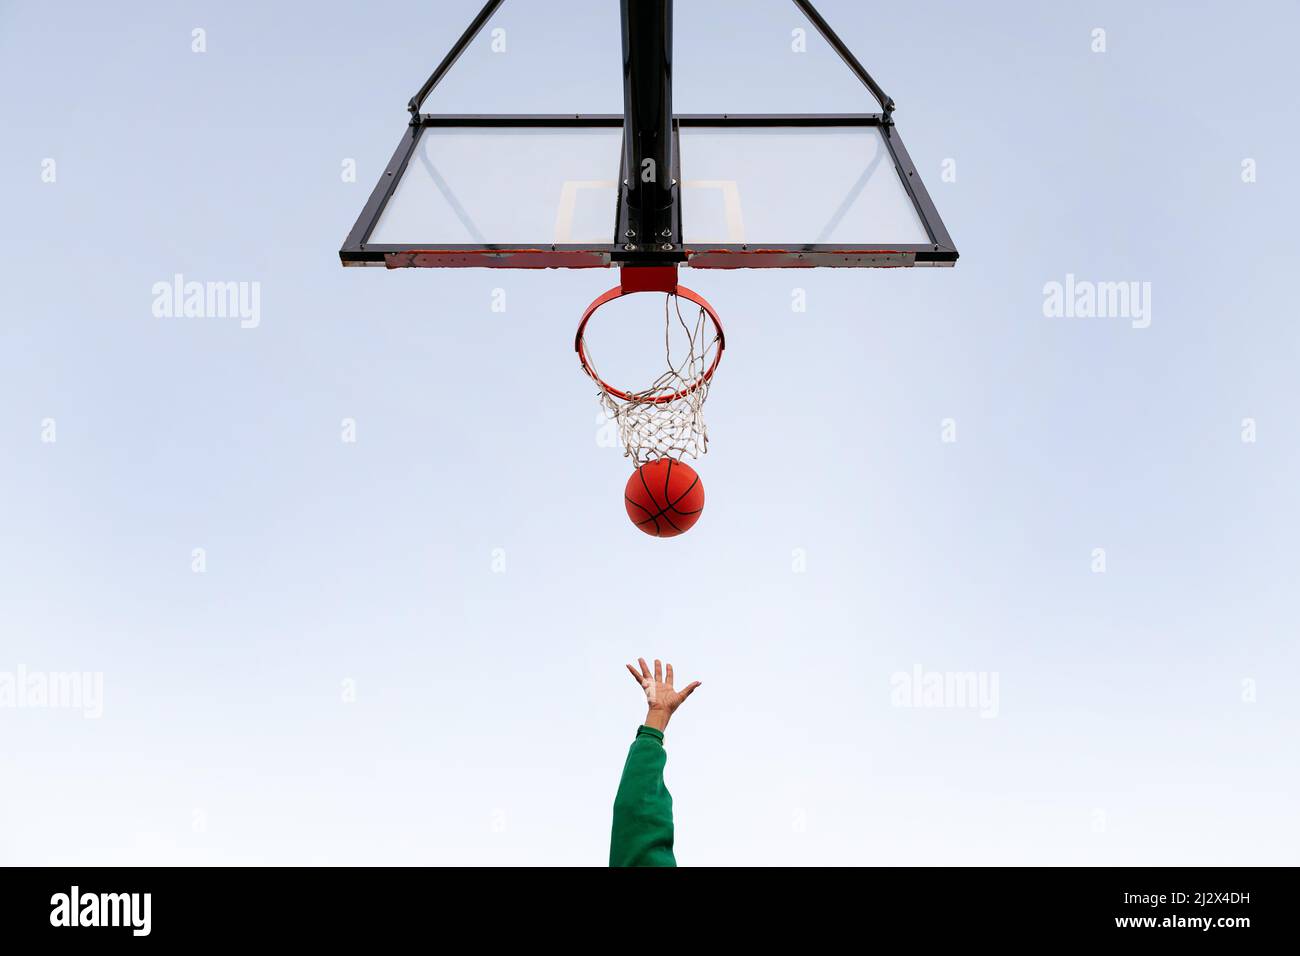 hand shooting in a basketball hoop seen from below with the sky in the background, concept of urban sport outdoors, copy space for text Stock Photo